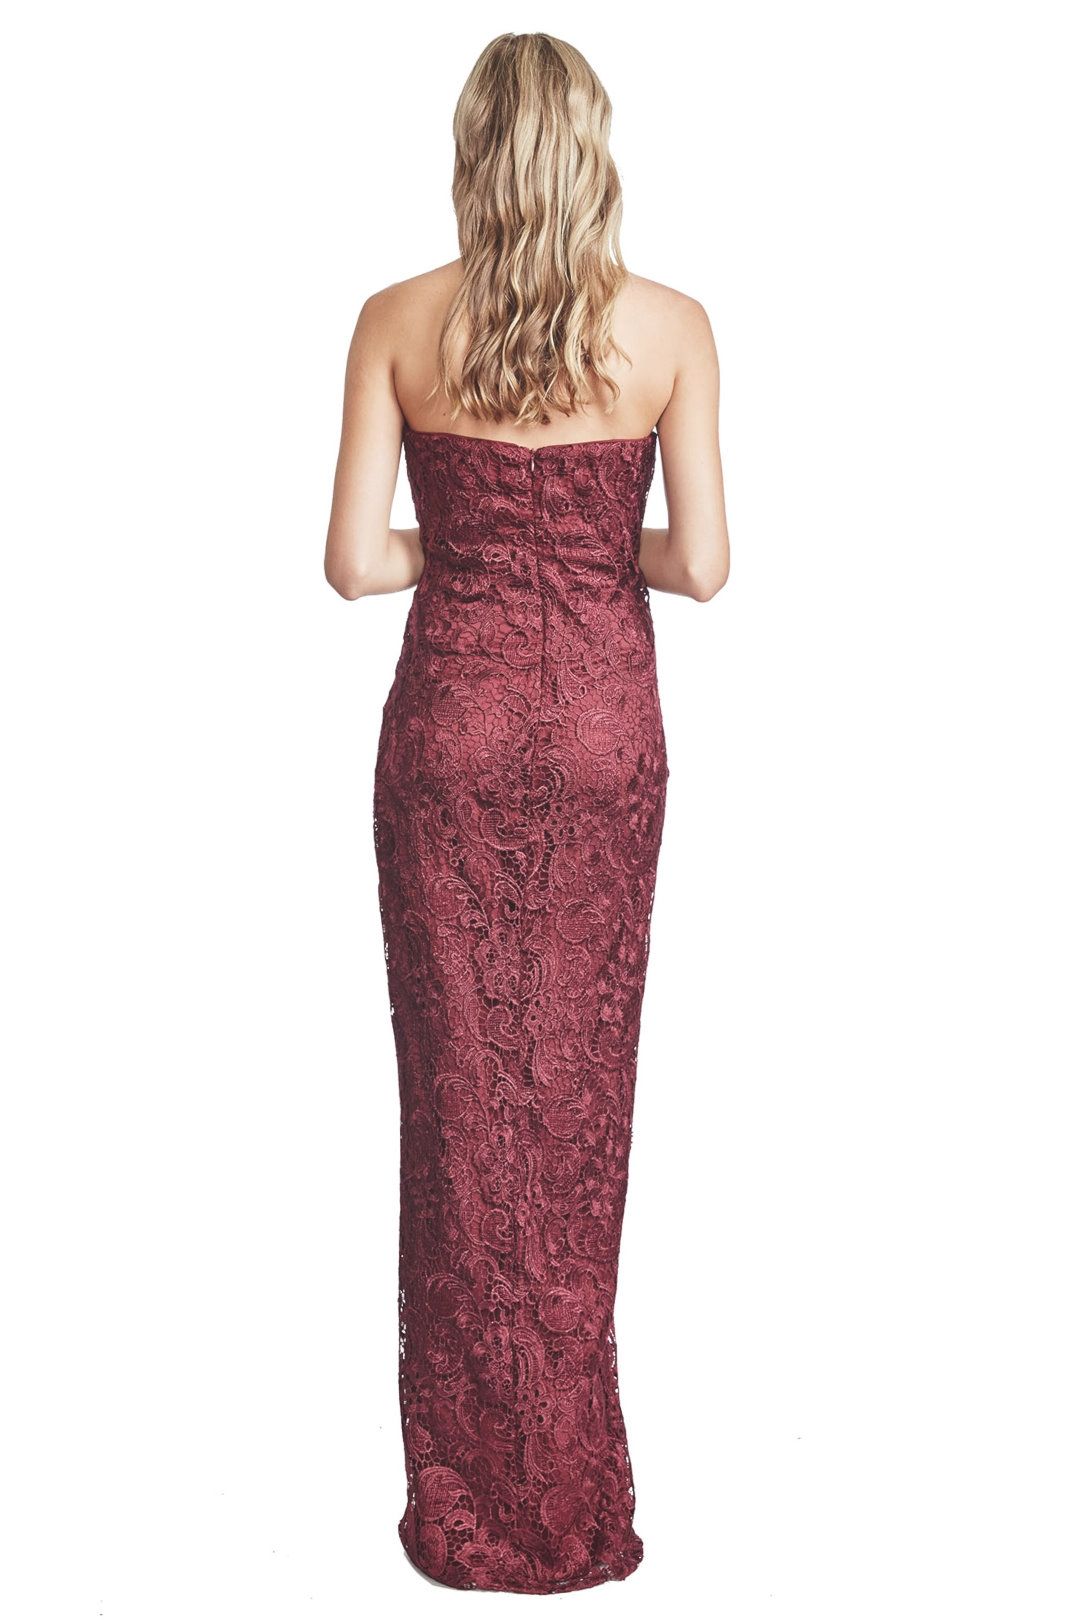 Langhem - Lana Berry Lace Evening Gown - Red - Back